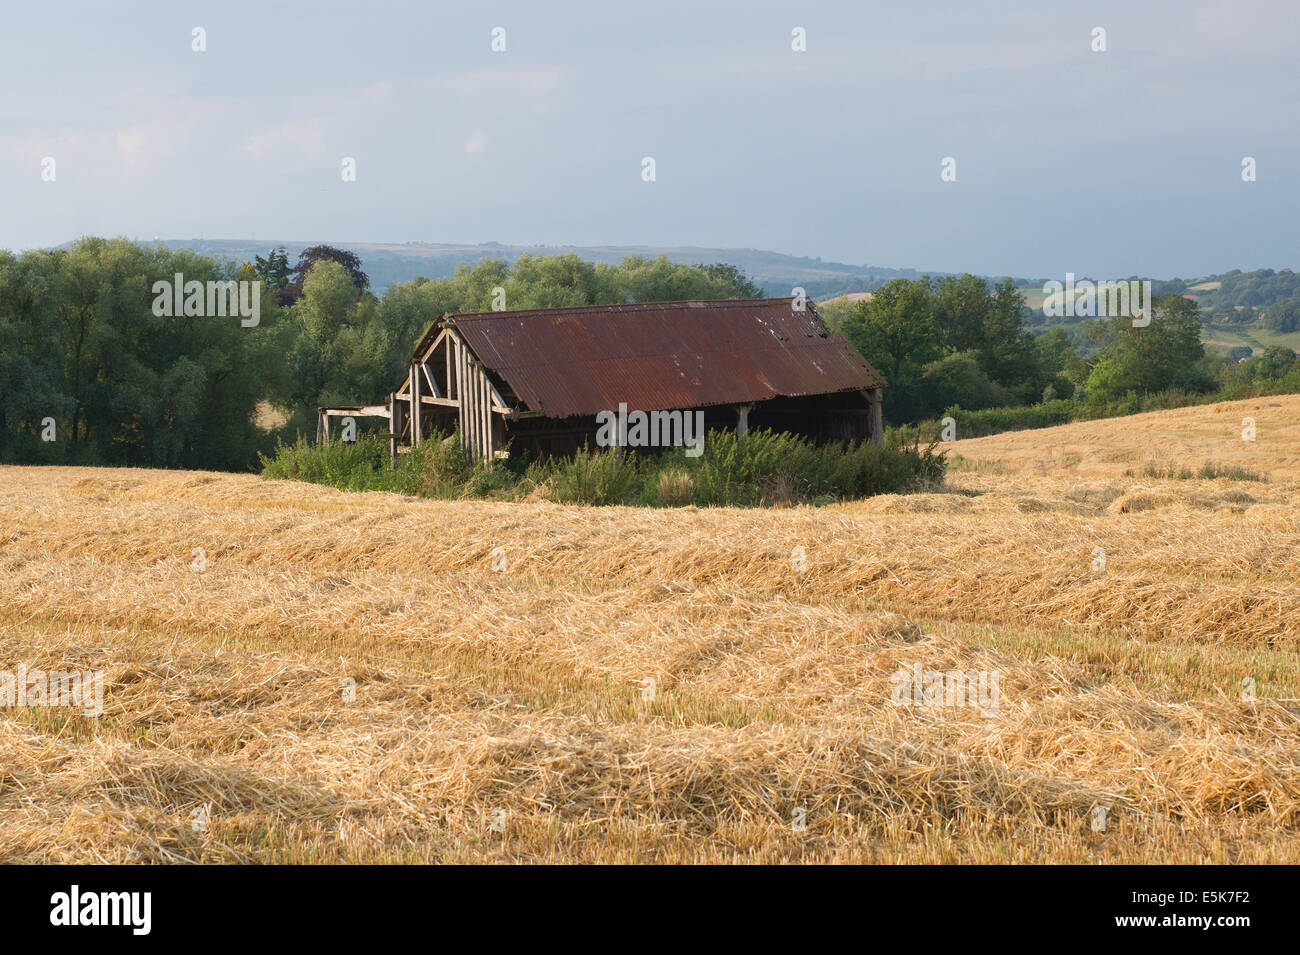 An old barn in a harvested field. Stock Photo